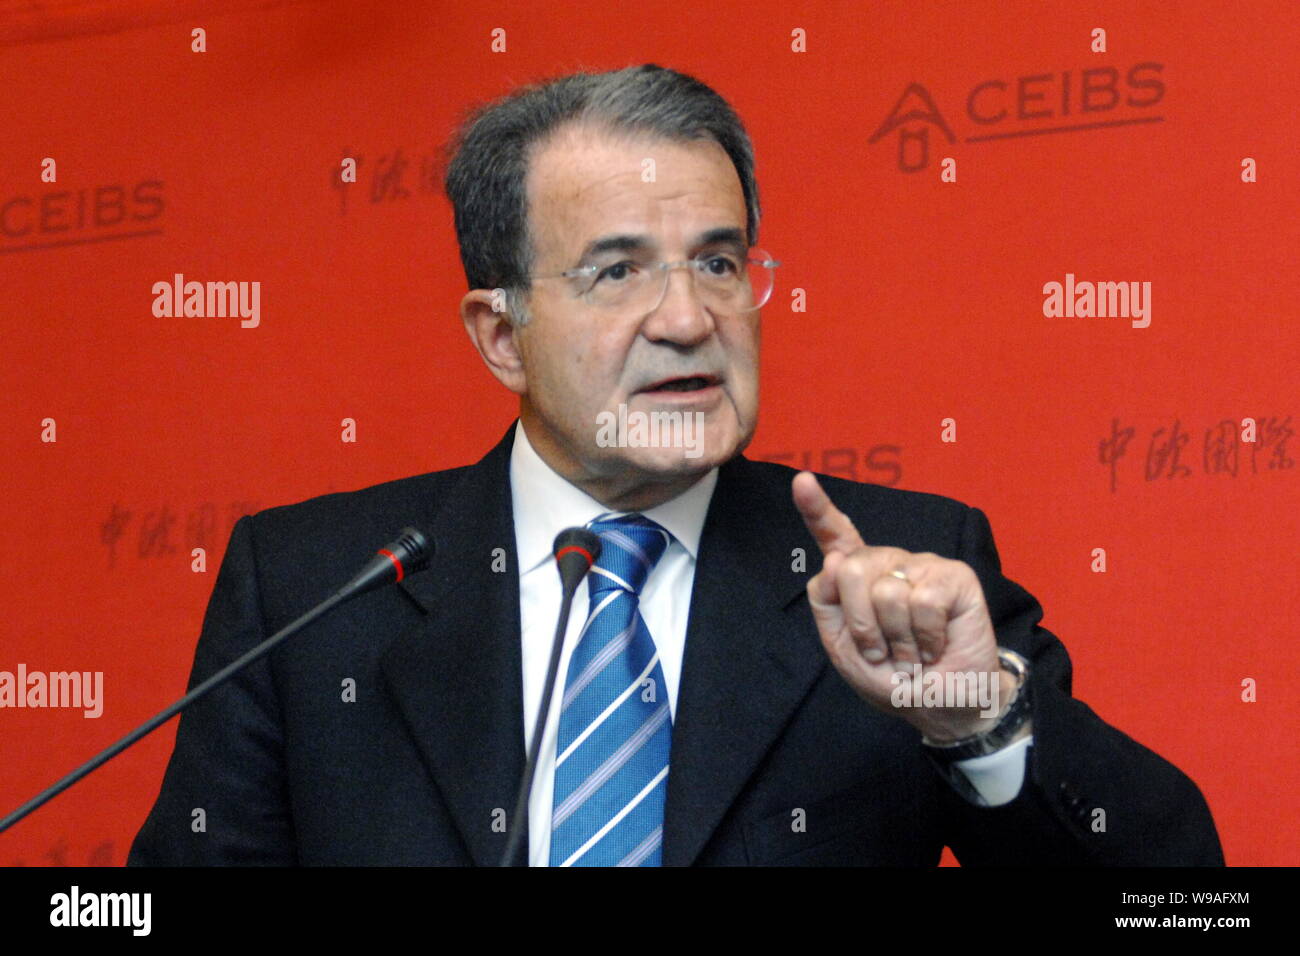 Romano Prodi, former European Commission President and former Italian Prime Minister, speaks during a press conference at CEIBS Lujiazui International Stock Photo